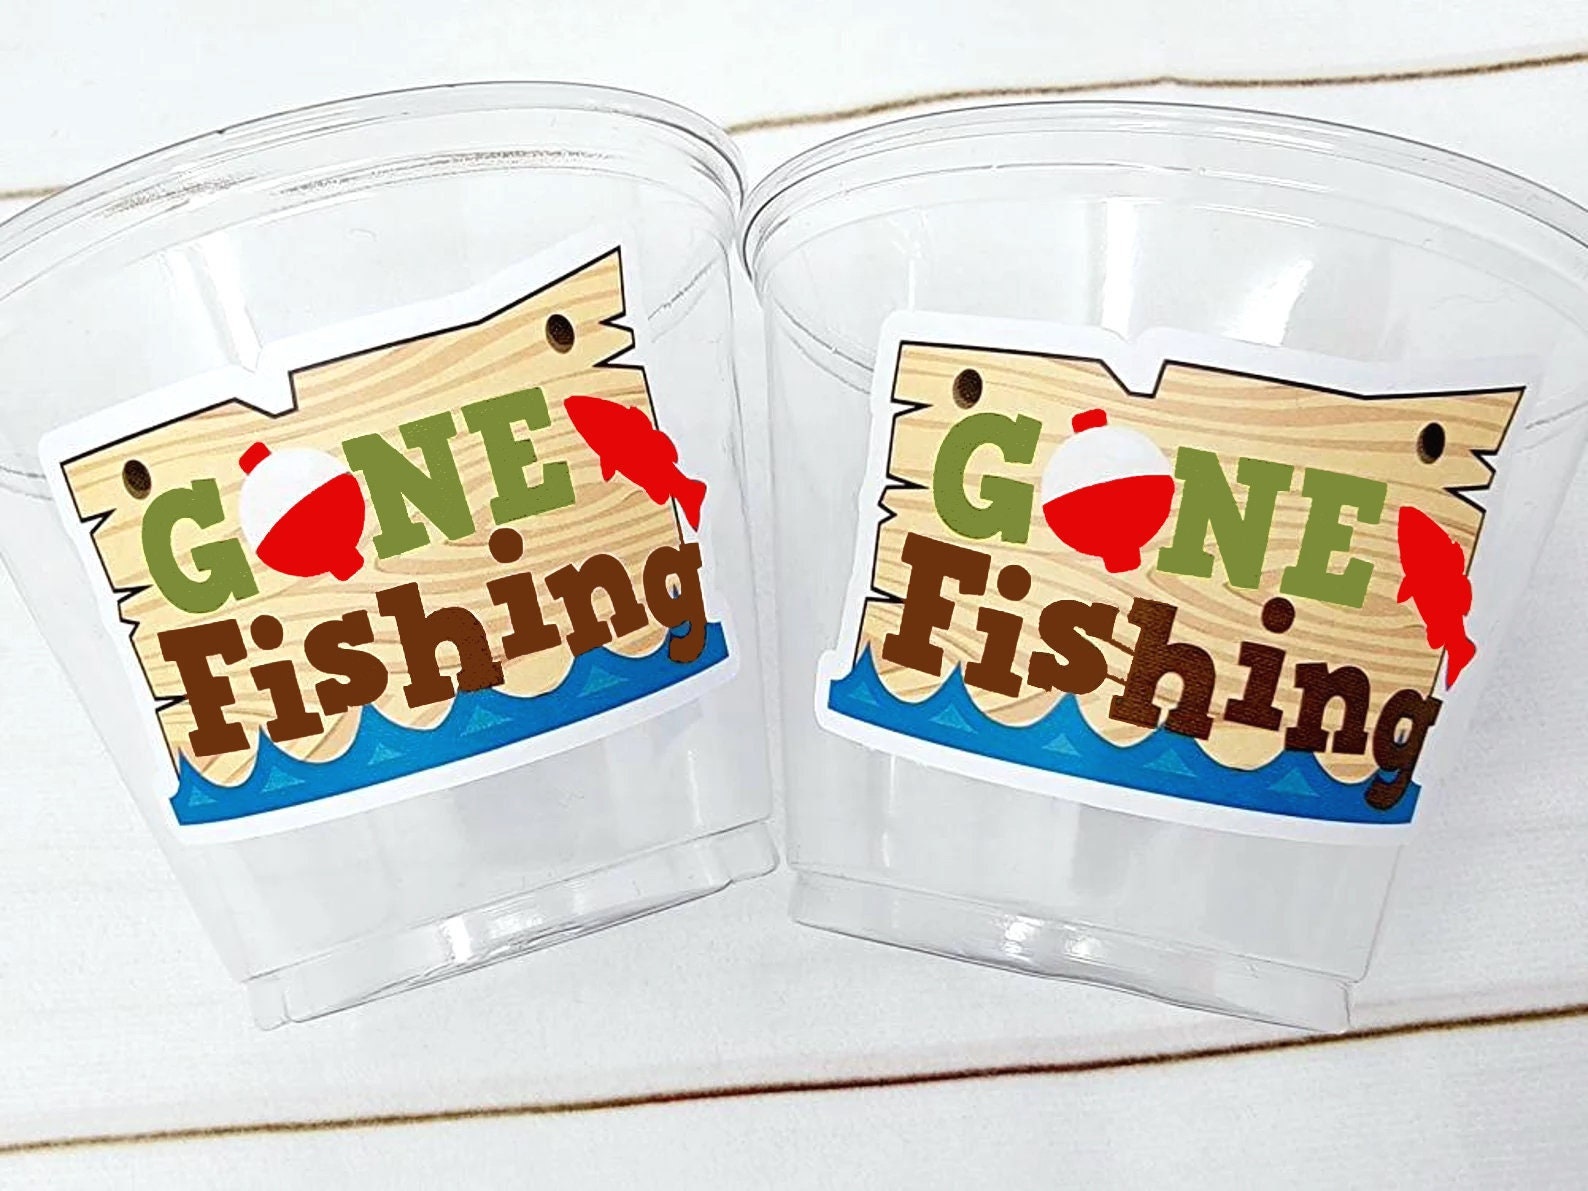 FISHING PARTY CUPS Gone Fishing Party Fishing Party the Big One Fishing  Bobber Decorations Fishing Birthday Fishing First Party Bait Cups 